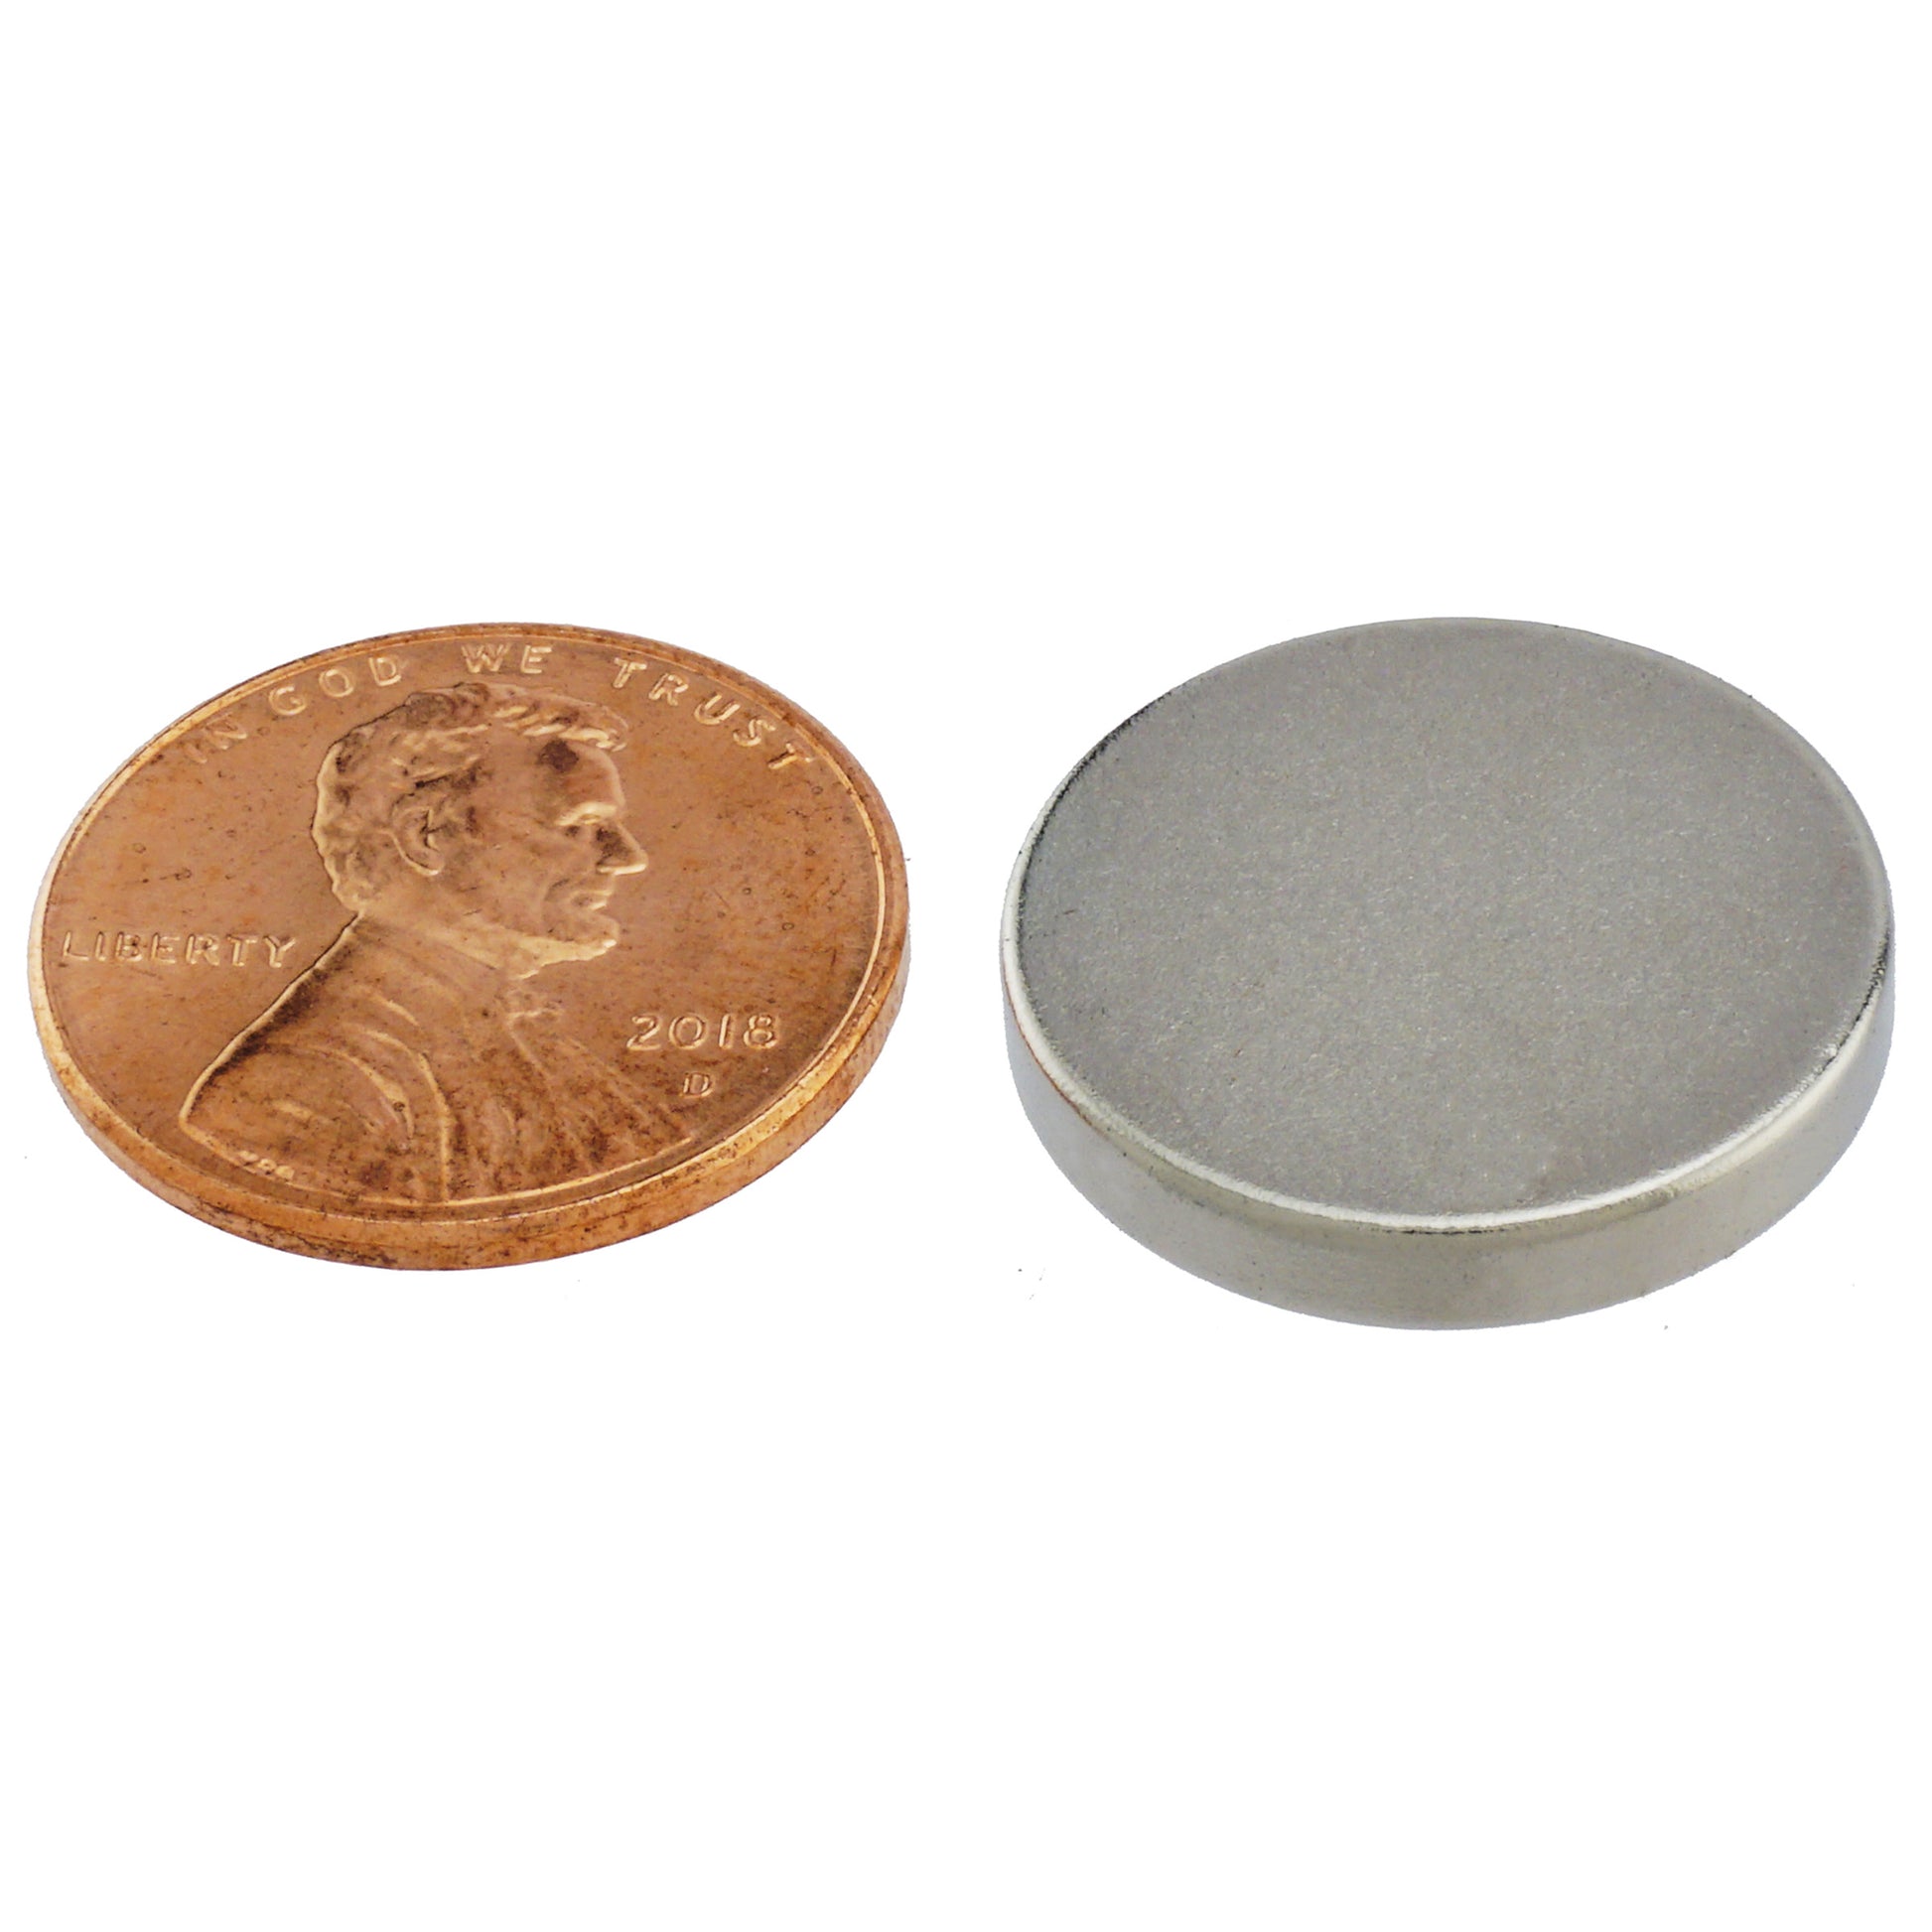 Load image into Gallery viewer, ND007509N Neodymium Disc Magnet - Compared to Penny for Size Reference